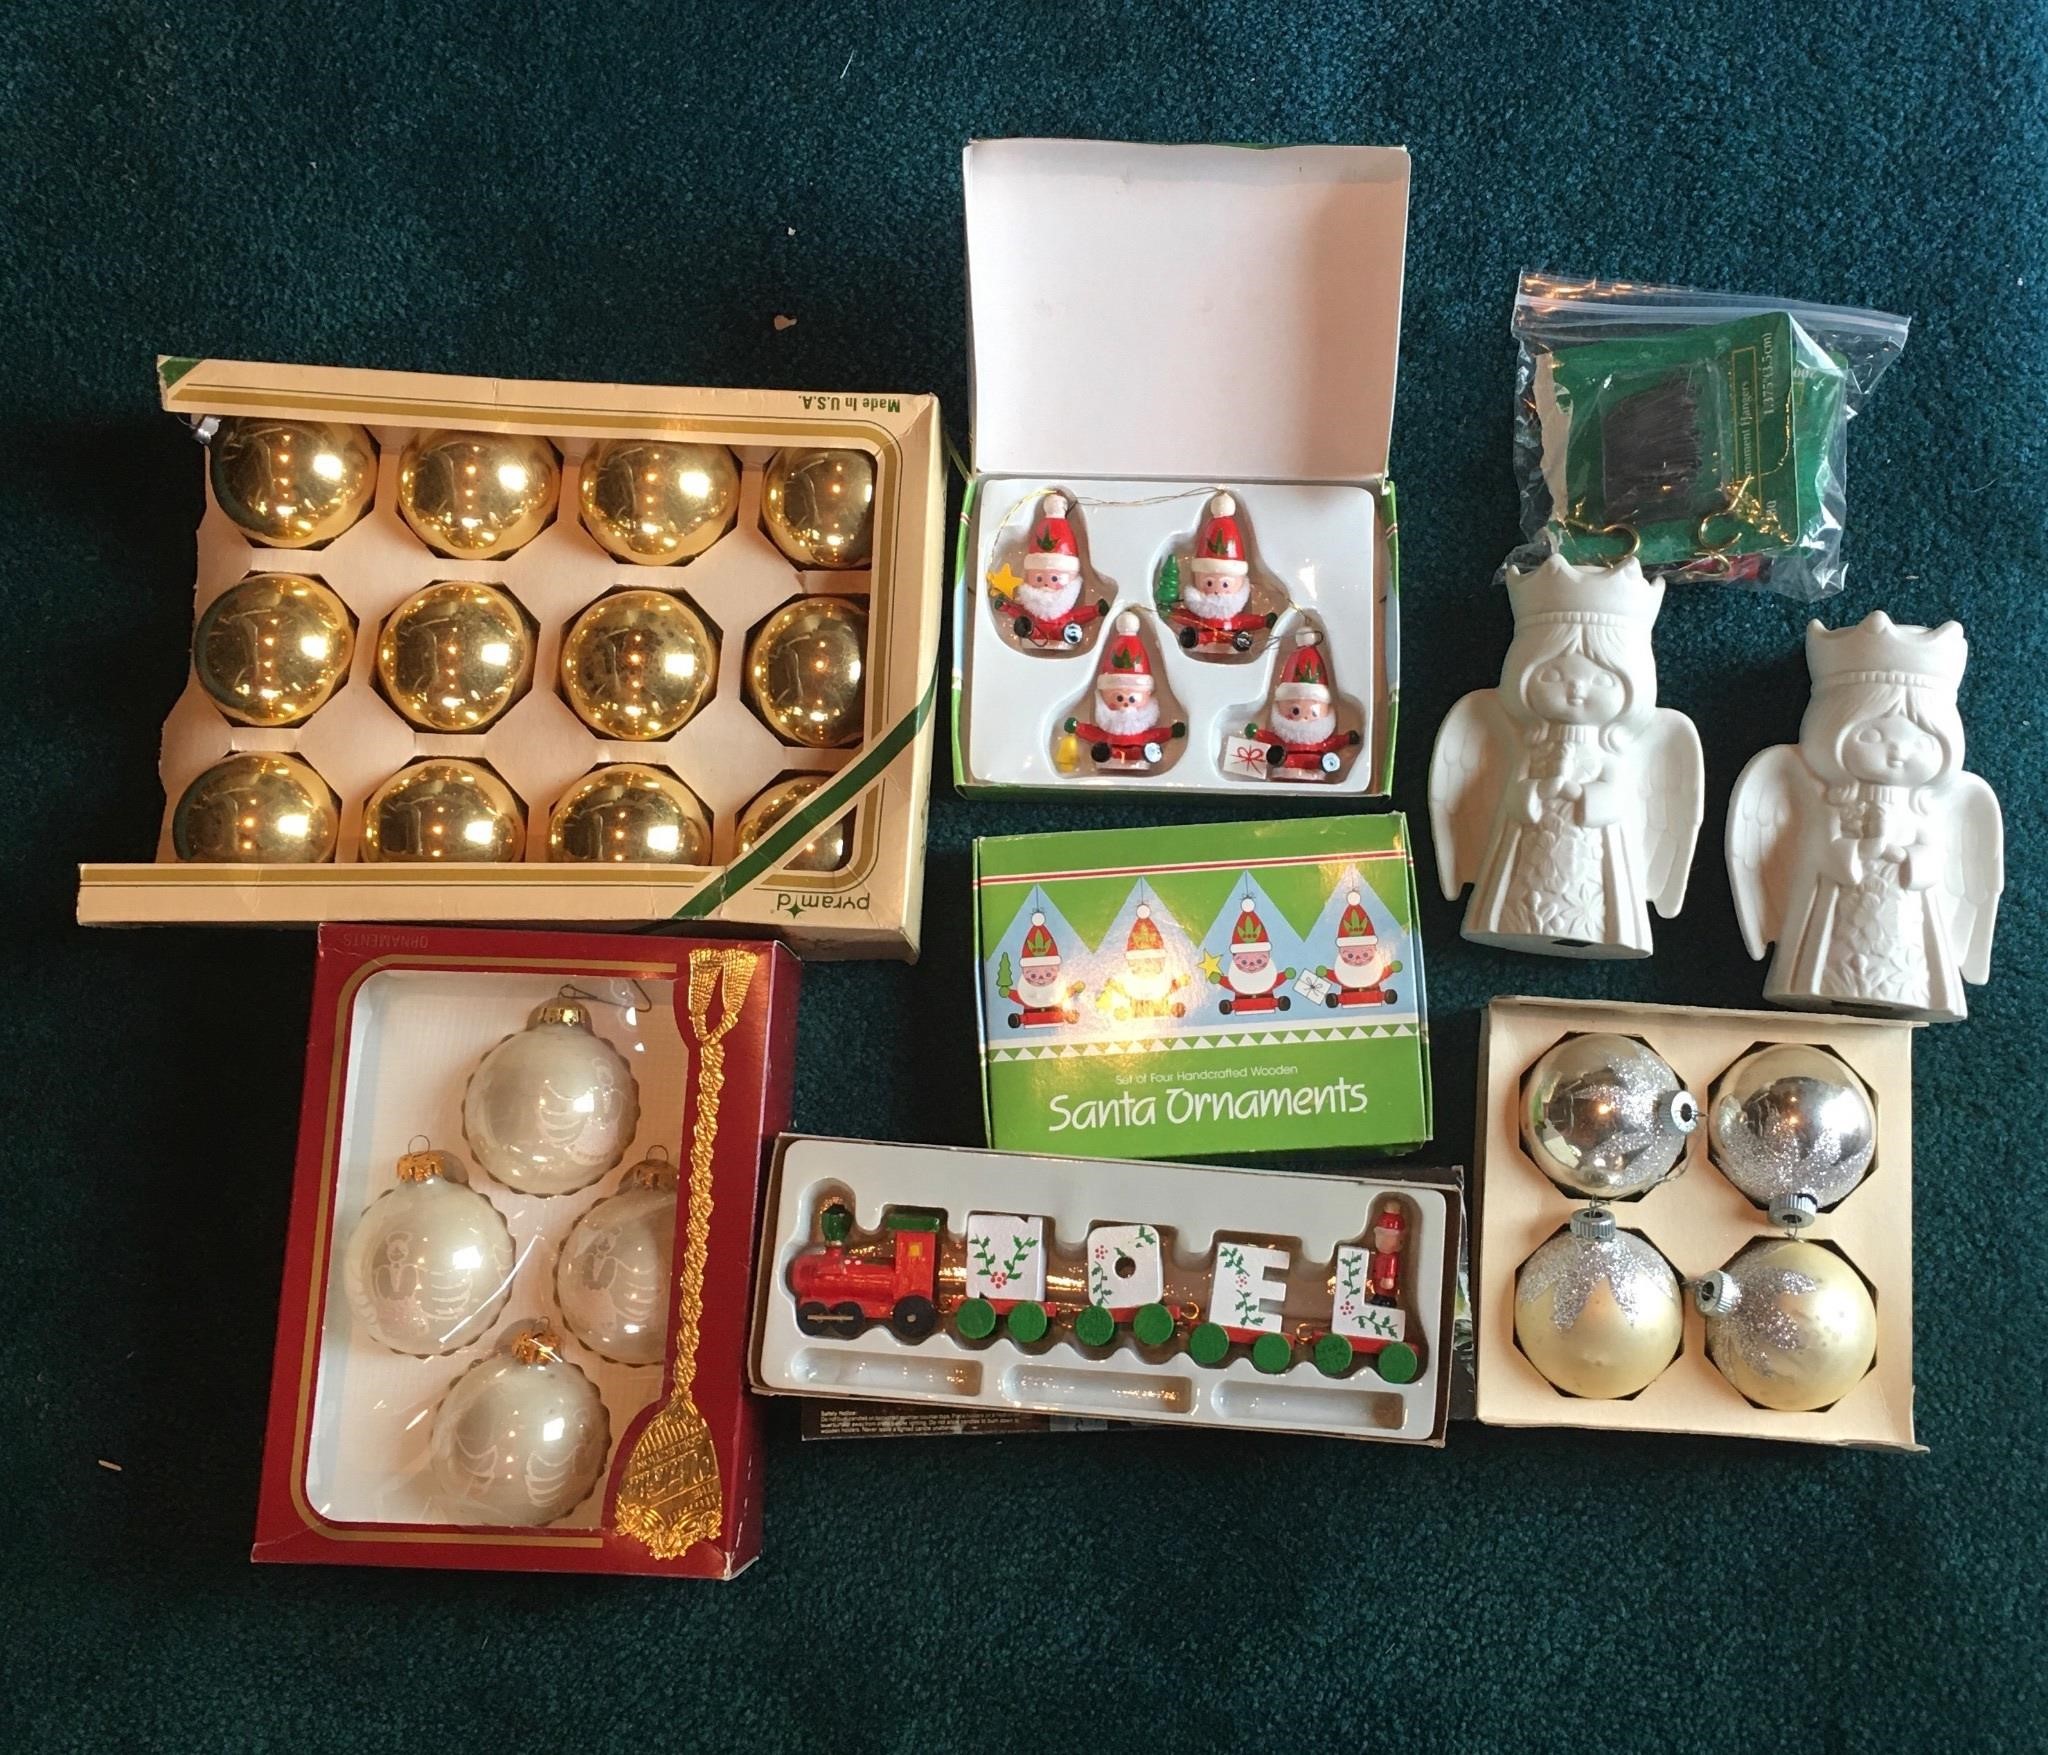 Christmas Ornaments and 2 Ceramic Angels